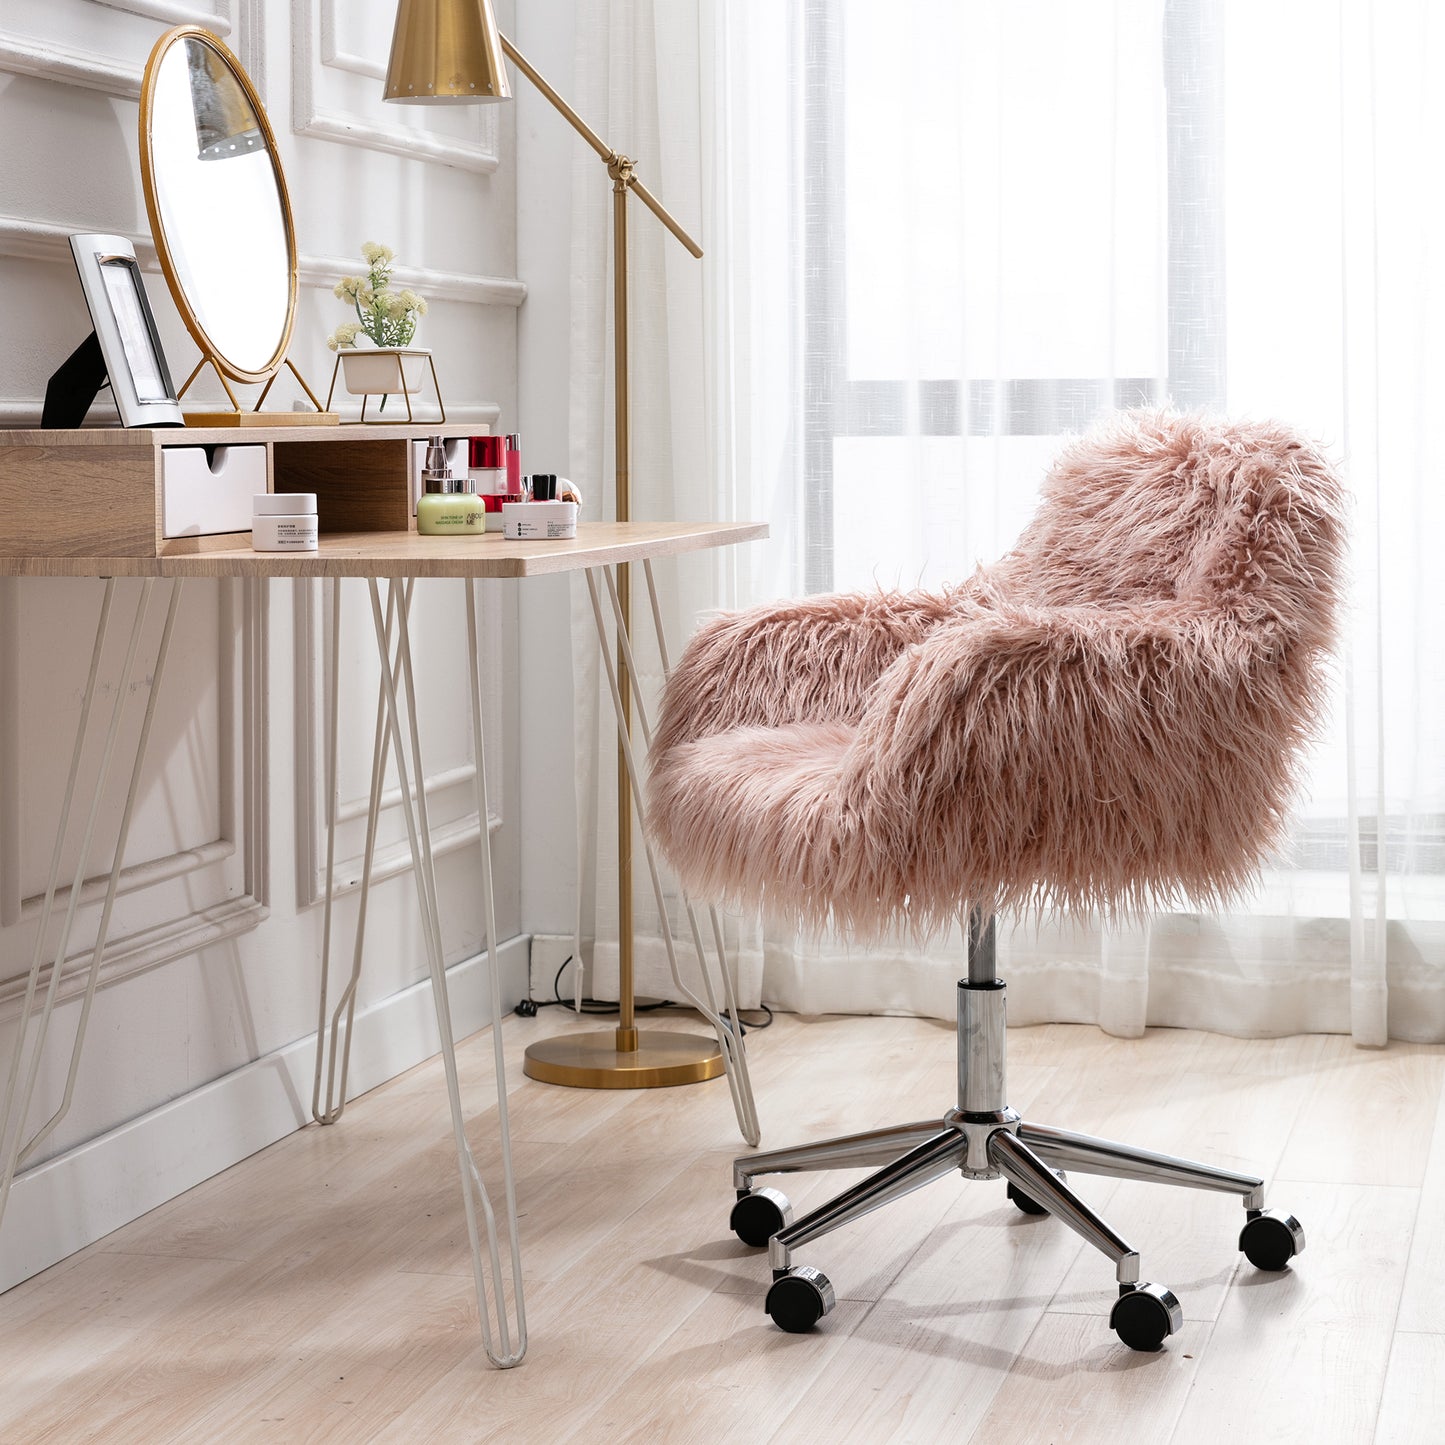 Office Chair, Fluffy Upholstered Desk Chair with Adjustable Height, 360 Degree Swivel and Metal Frame, Faux Fur Plush Seat and Back, Modern Office Computer Chair for Home Office, White, C20